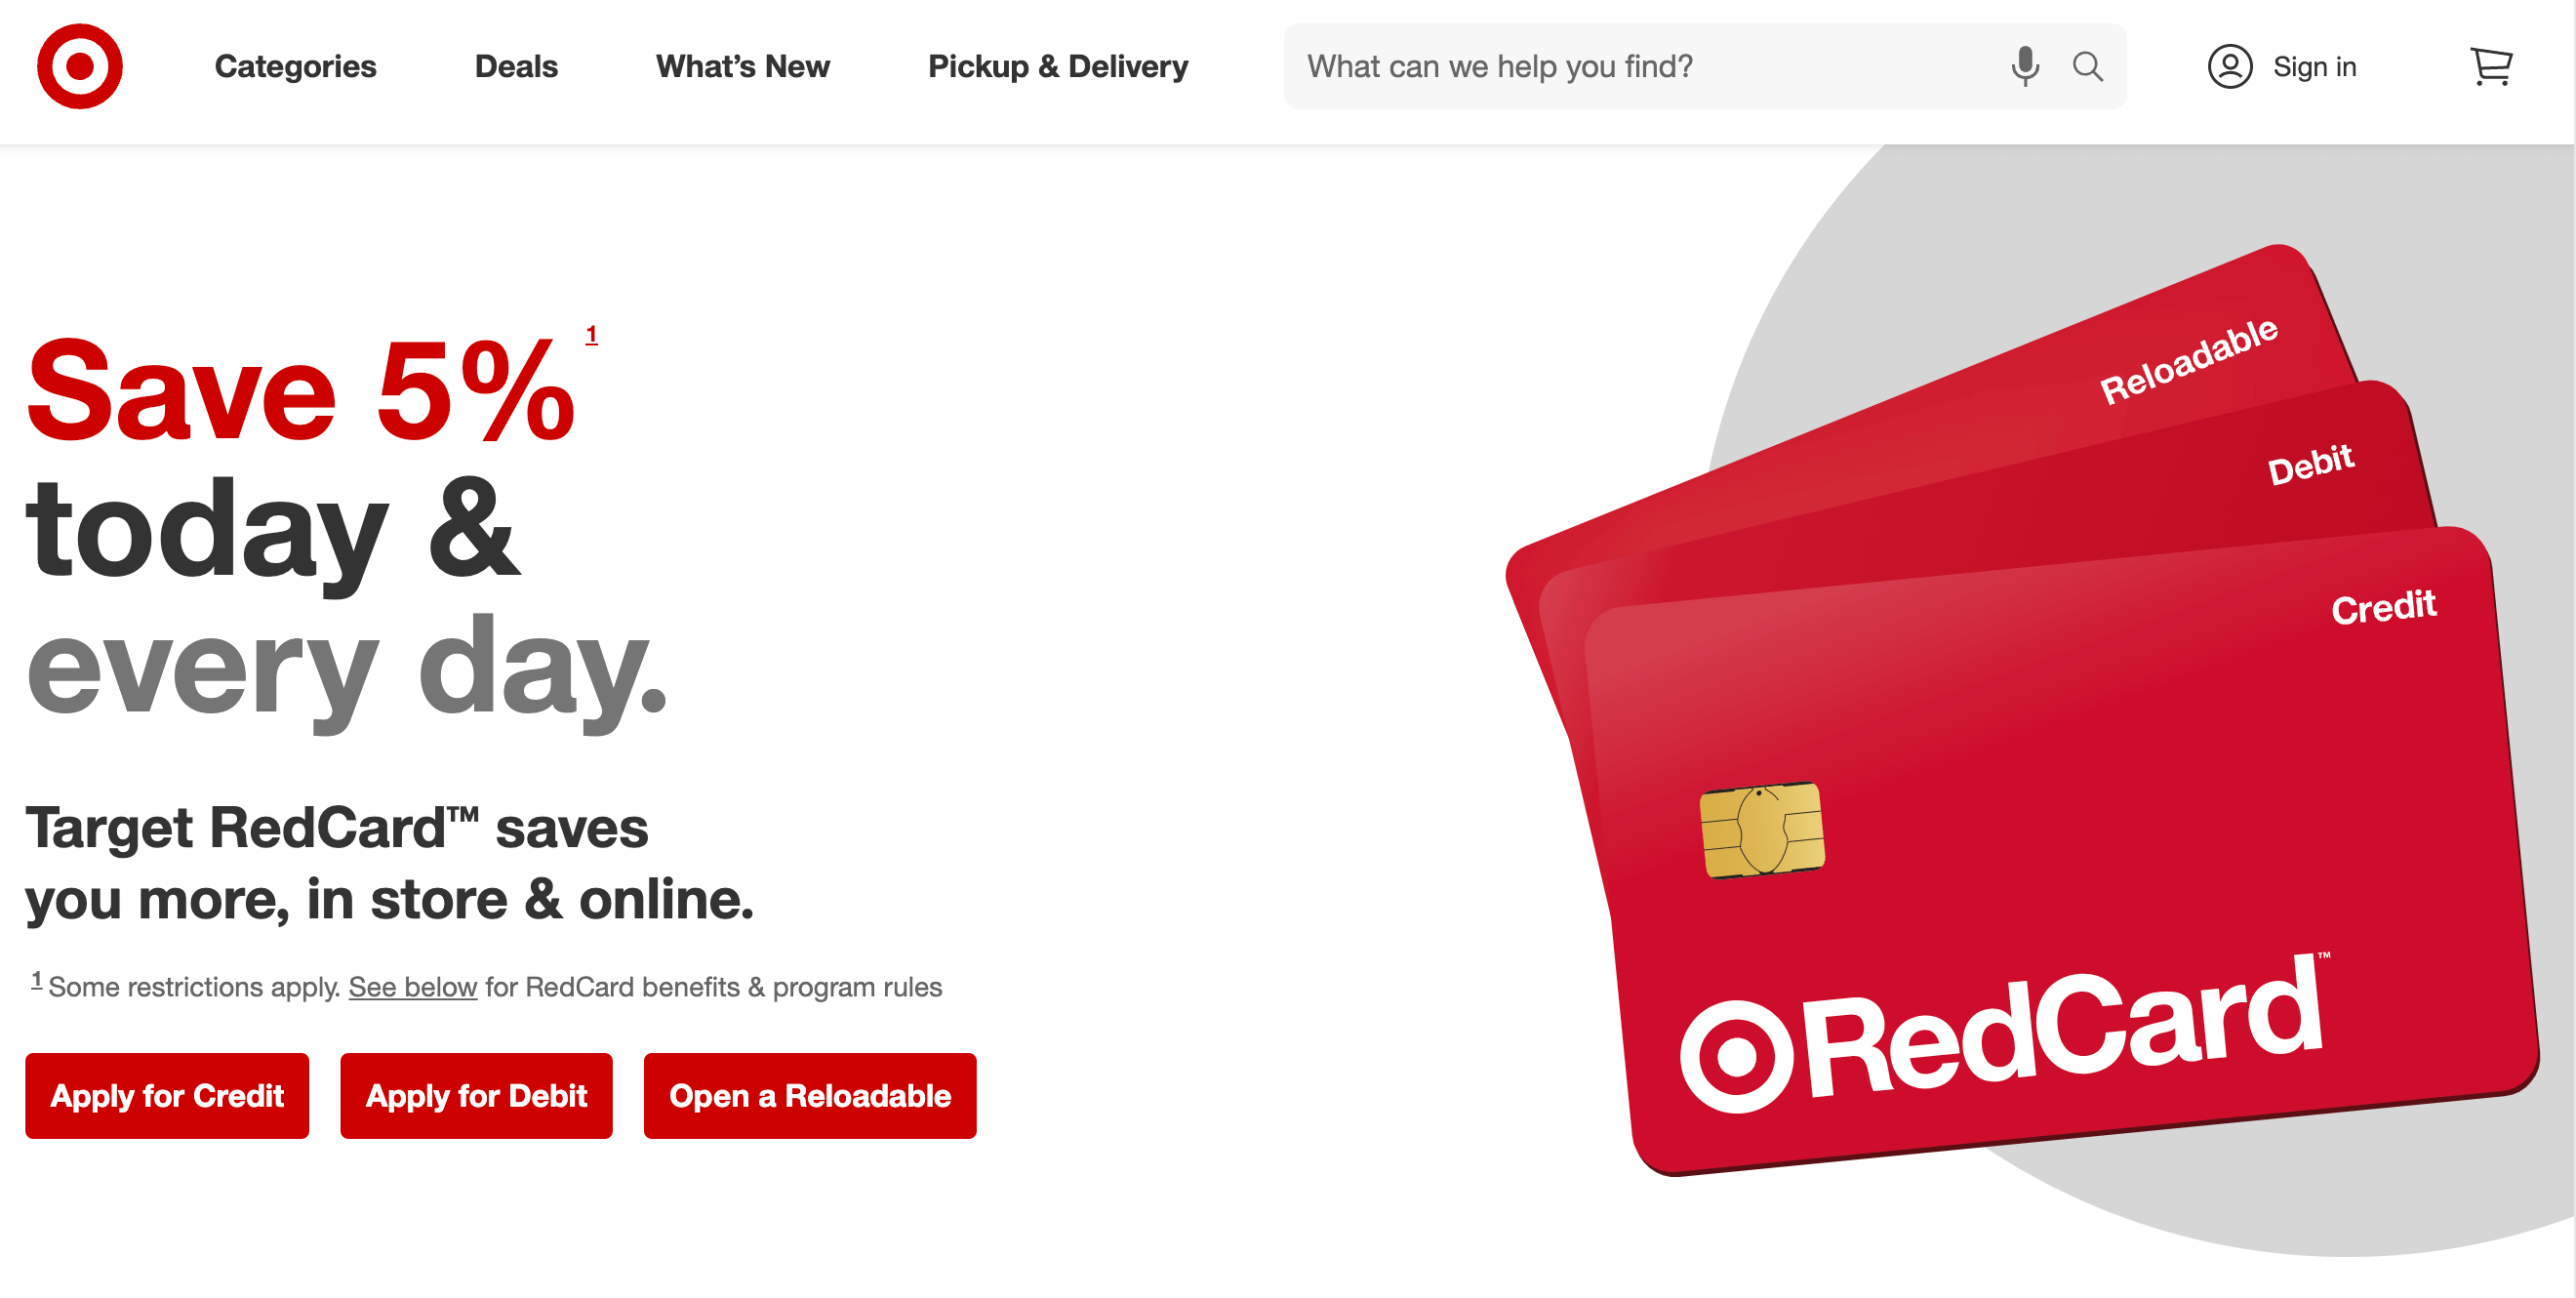 A screenshot from Target’s website explaining the RedCard program: Save 5% today and every day. Target RedCard saves you more, in store and online. There are three red call-to-action buttons below the header text: Apply for Credit, Apply for Debit, and Open a Reloadable. To the right of the text is a large image of the three Target credit cards, which are red cards with white text that says RedCard with the bullseye beside it. 